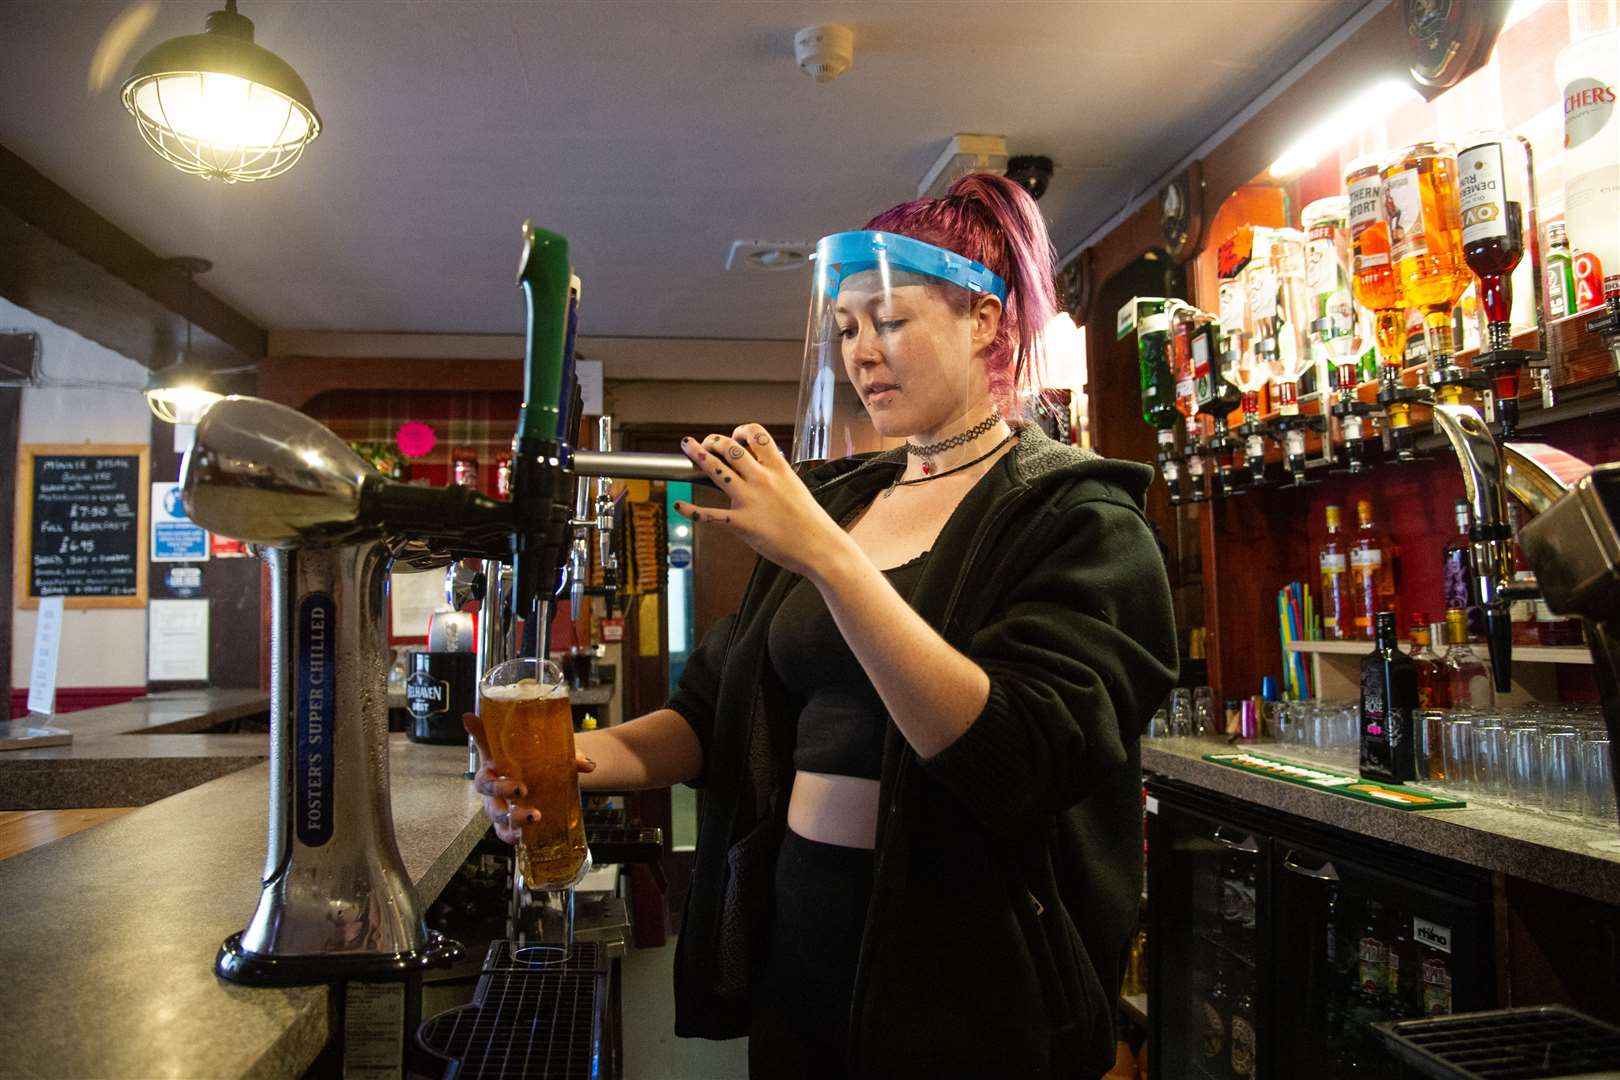 Bars and other hospitality businesses have reopened, but many remain concerned for their future. Picture: Daniel Forsyth.